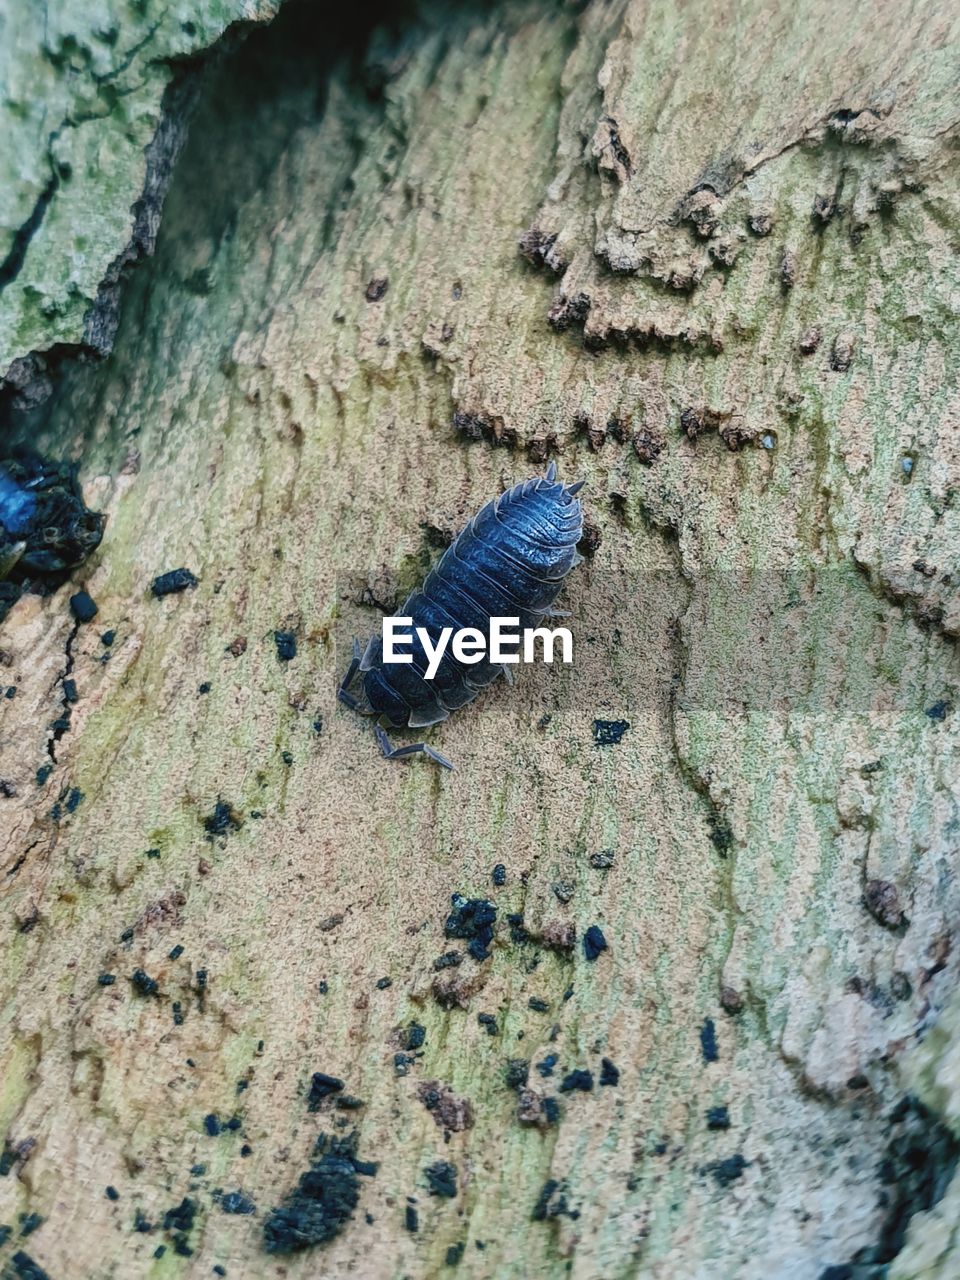 CLOSE-UP OF INSECT ON TREE